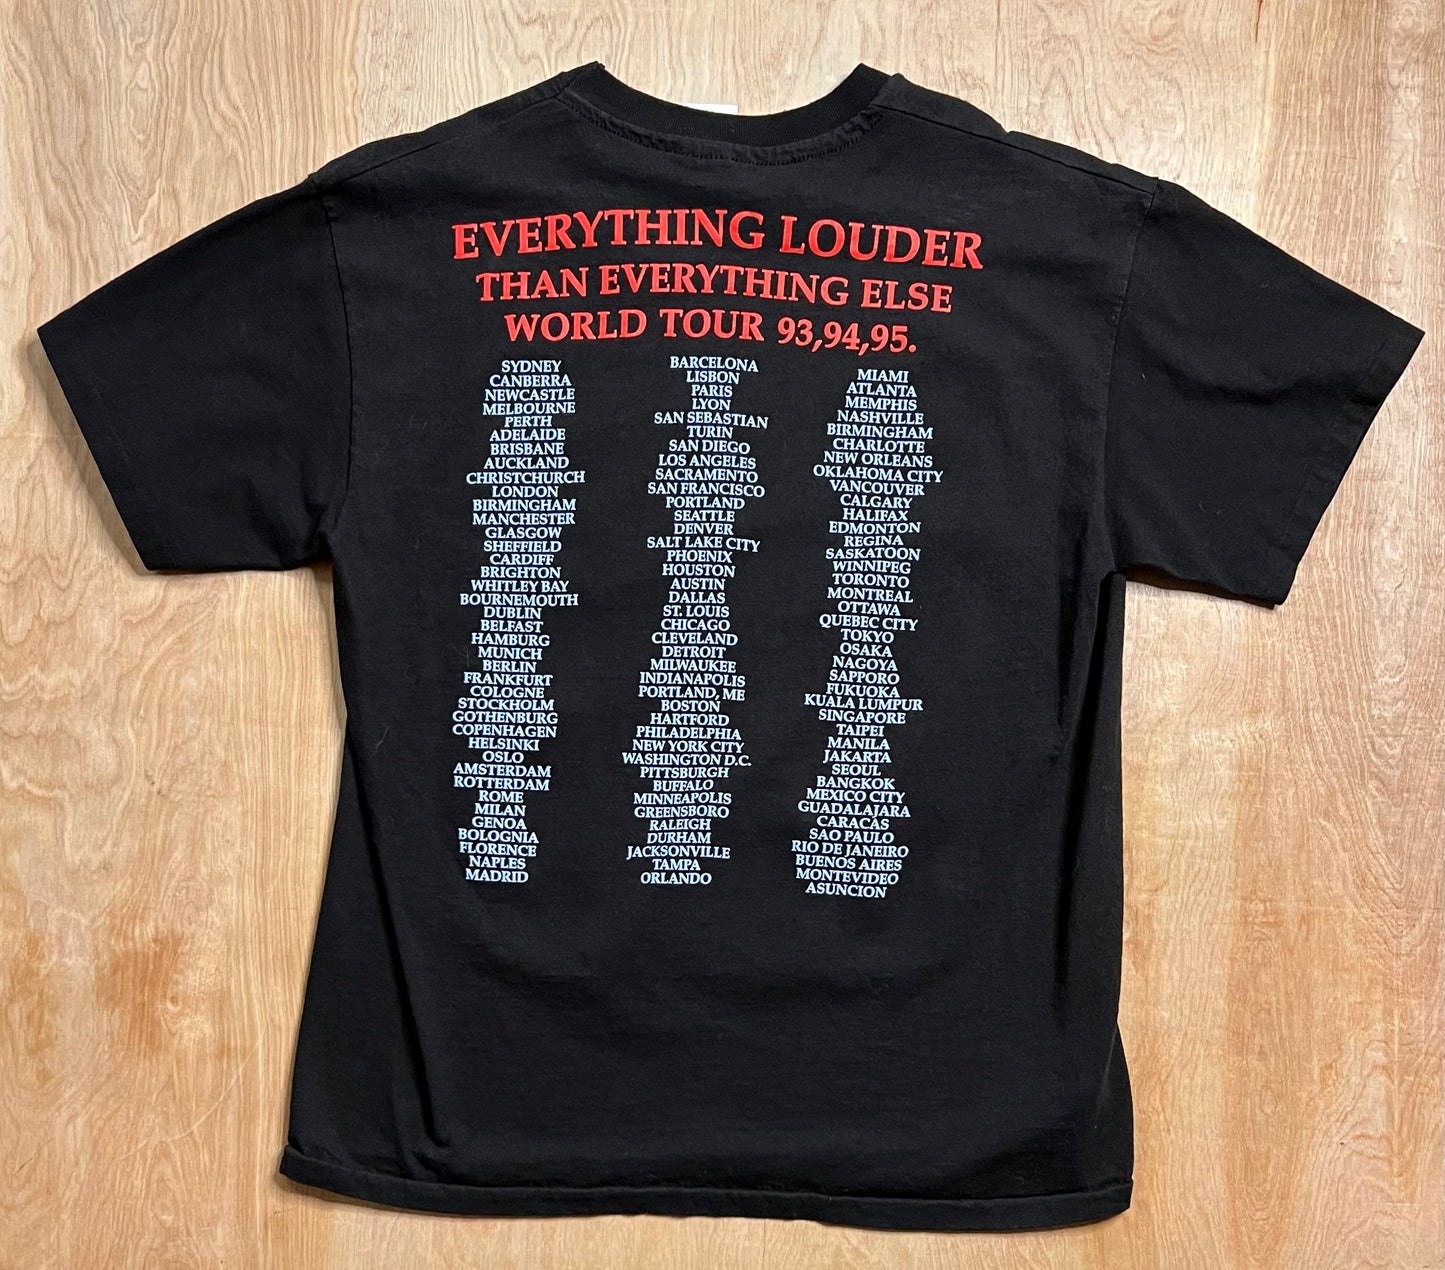 1994 Meat Loaf "Everything Louder Than Everything Else World Tour" Single Stitch T-Shirt